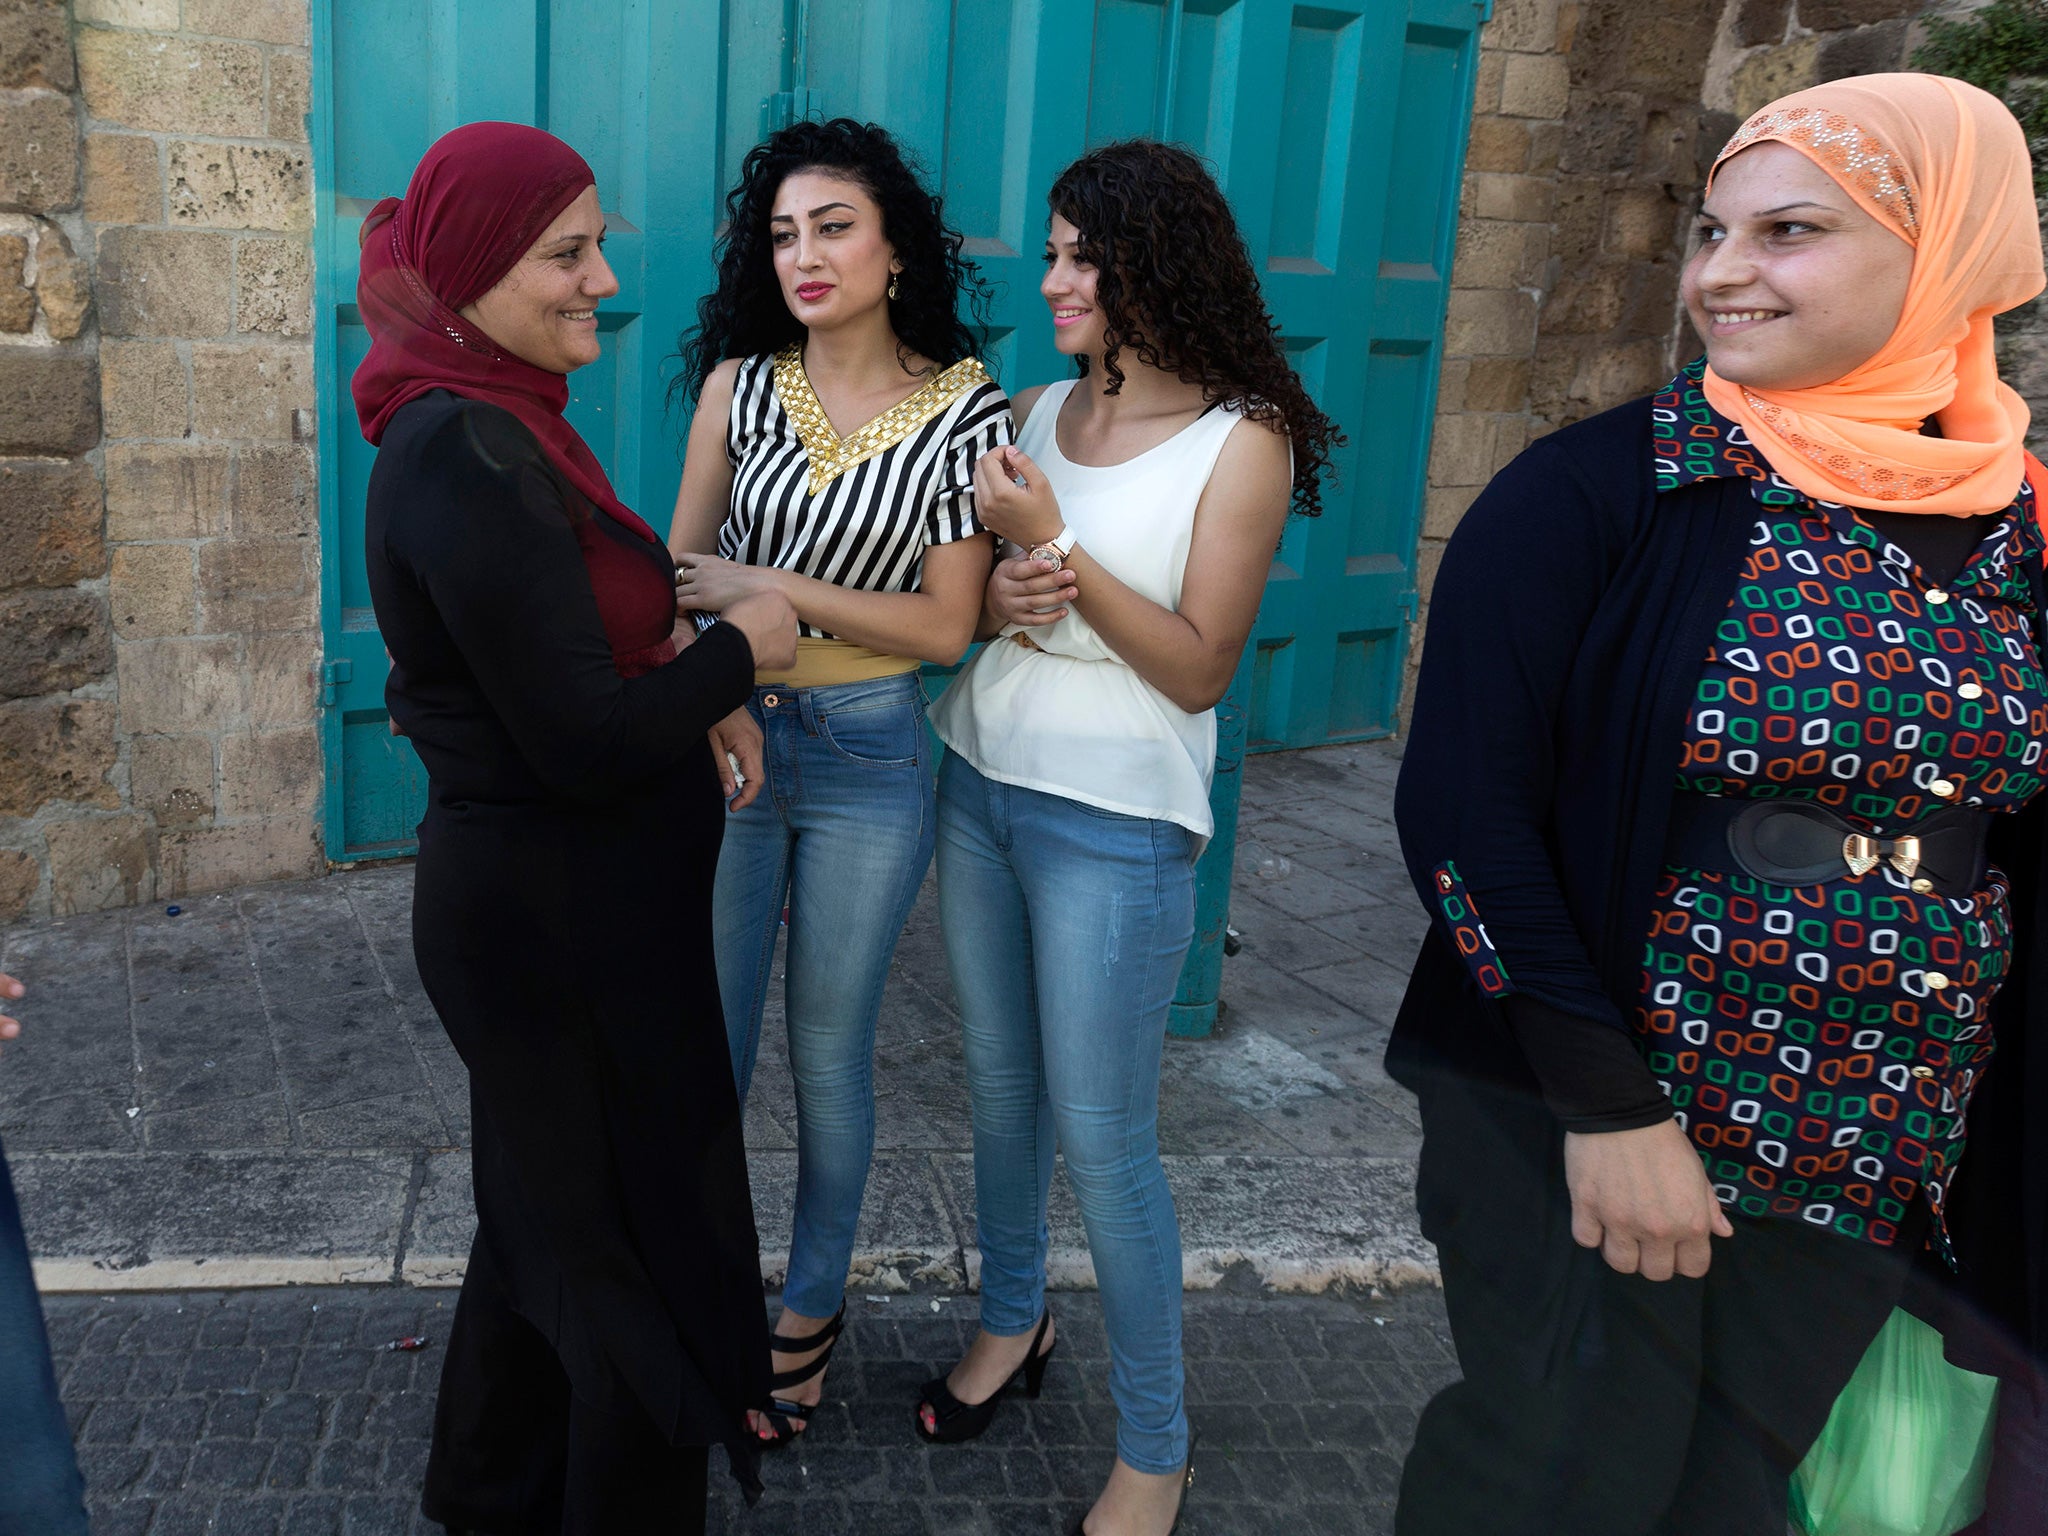 A new poll is predicting an increase in voter turnout among Israel’s Arab minority